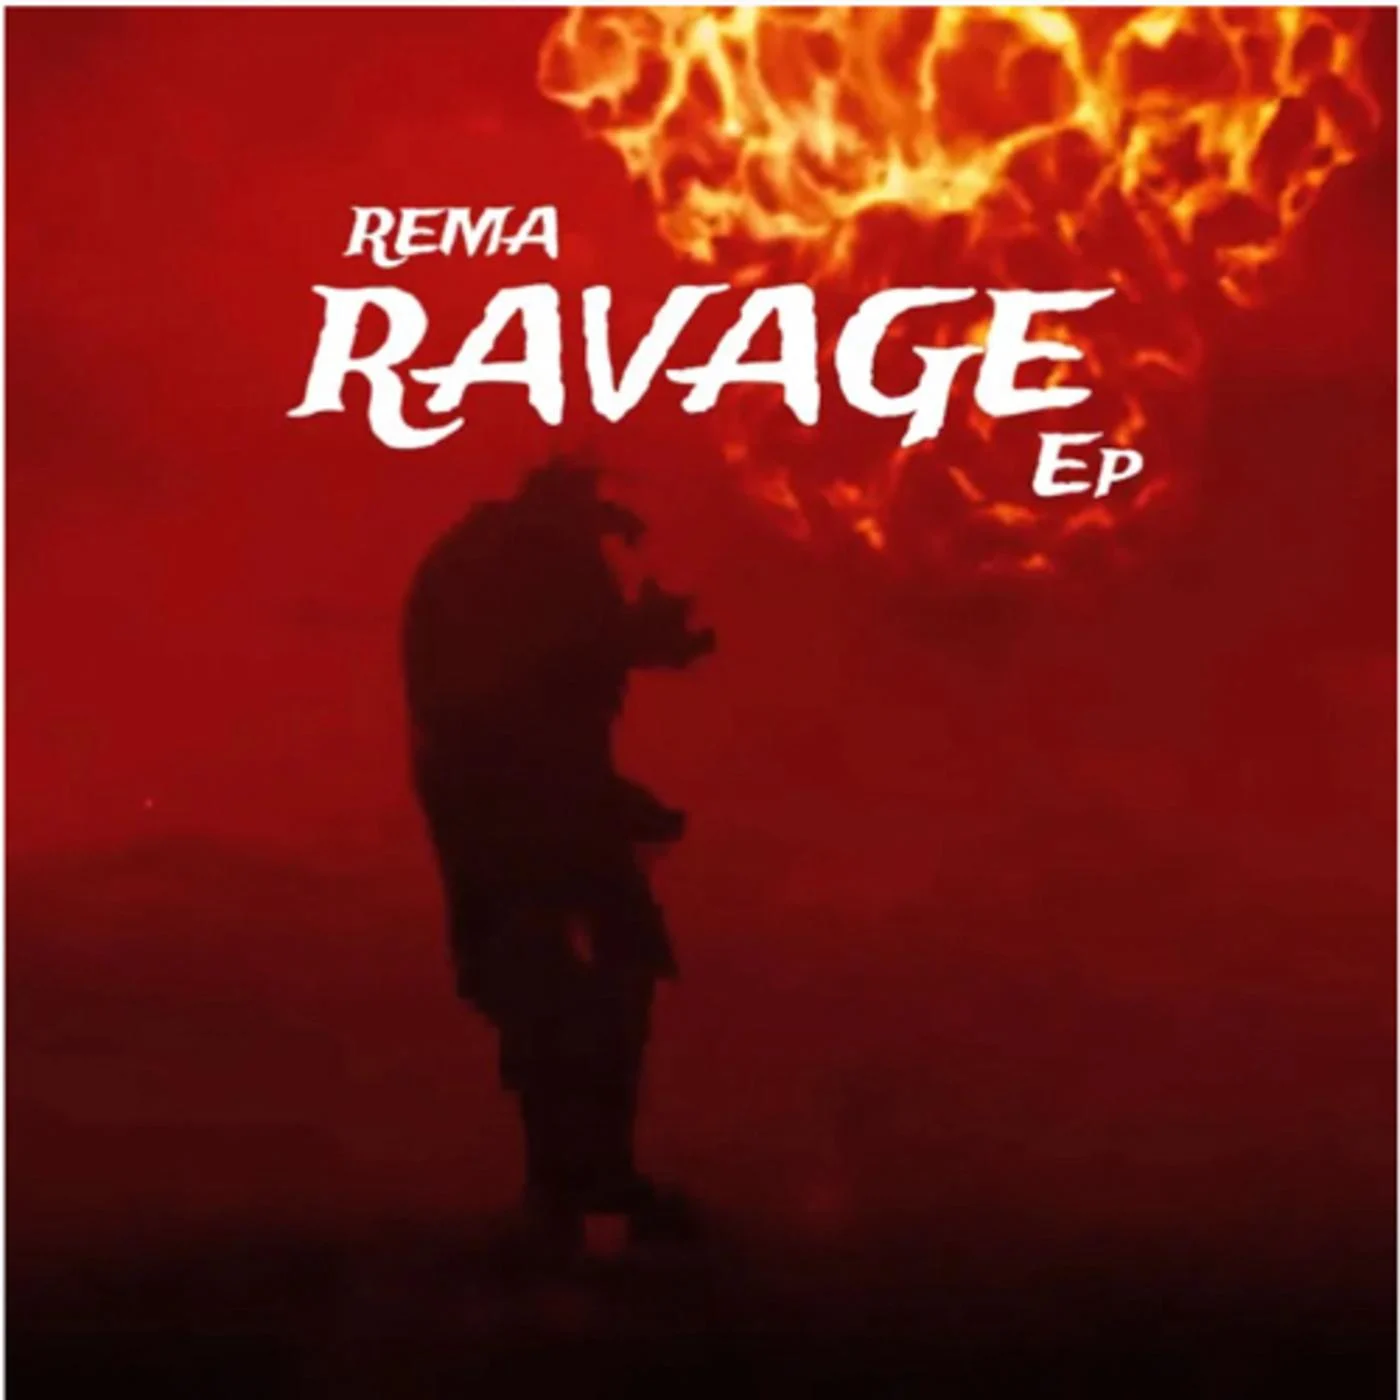 Rema’s ‘Ravage’ EP: Fueling the Fire of Nigerian Afrobeat